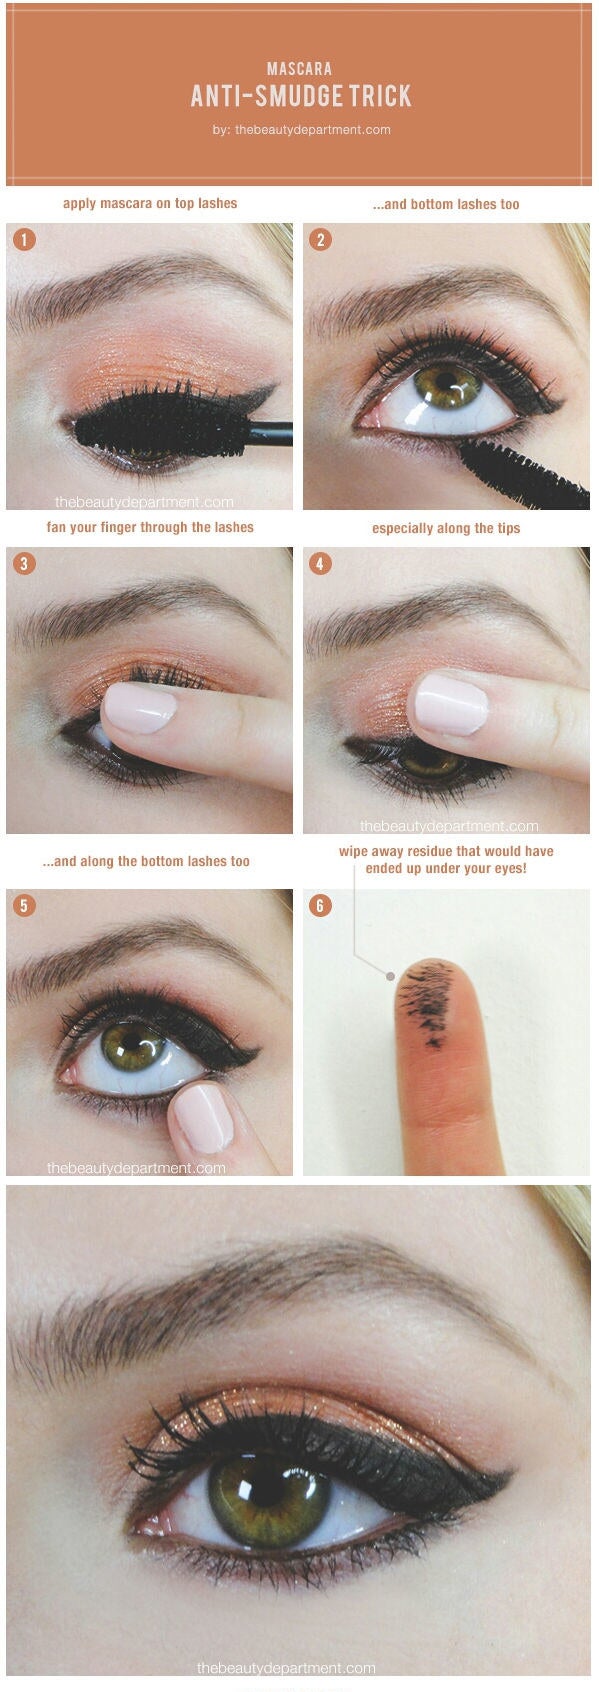 Tips And Tricks For Getting Your Makeup